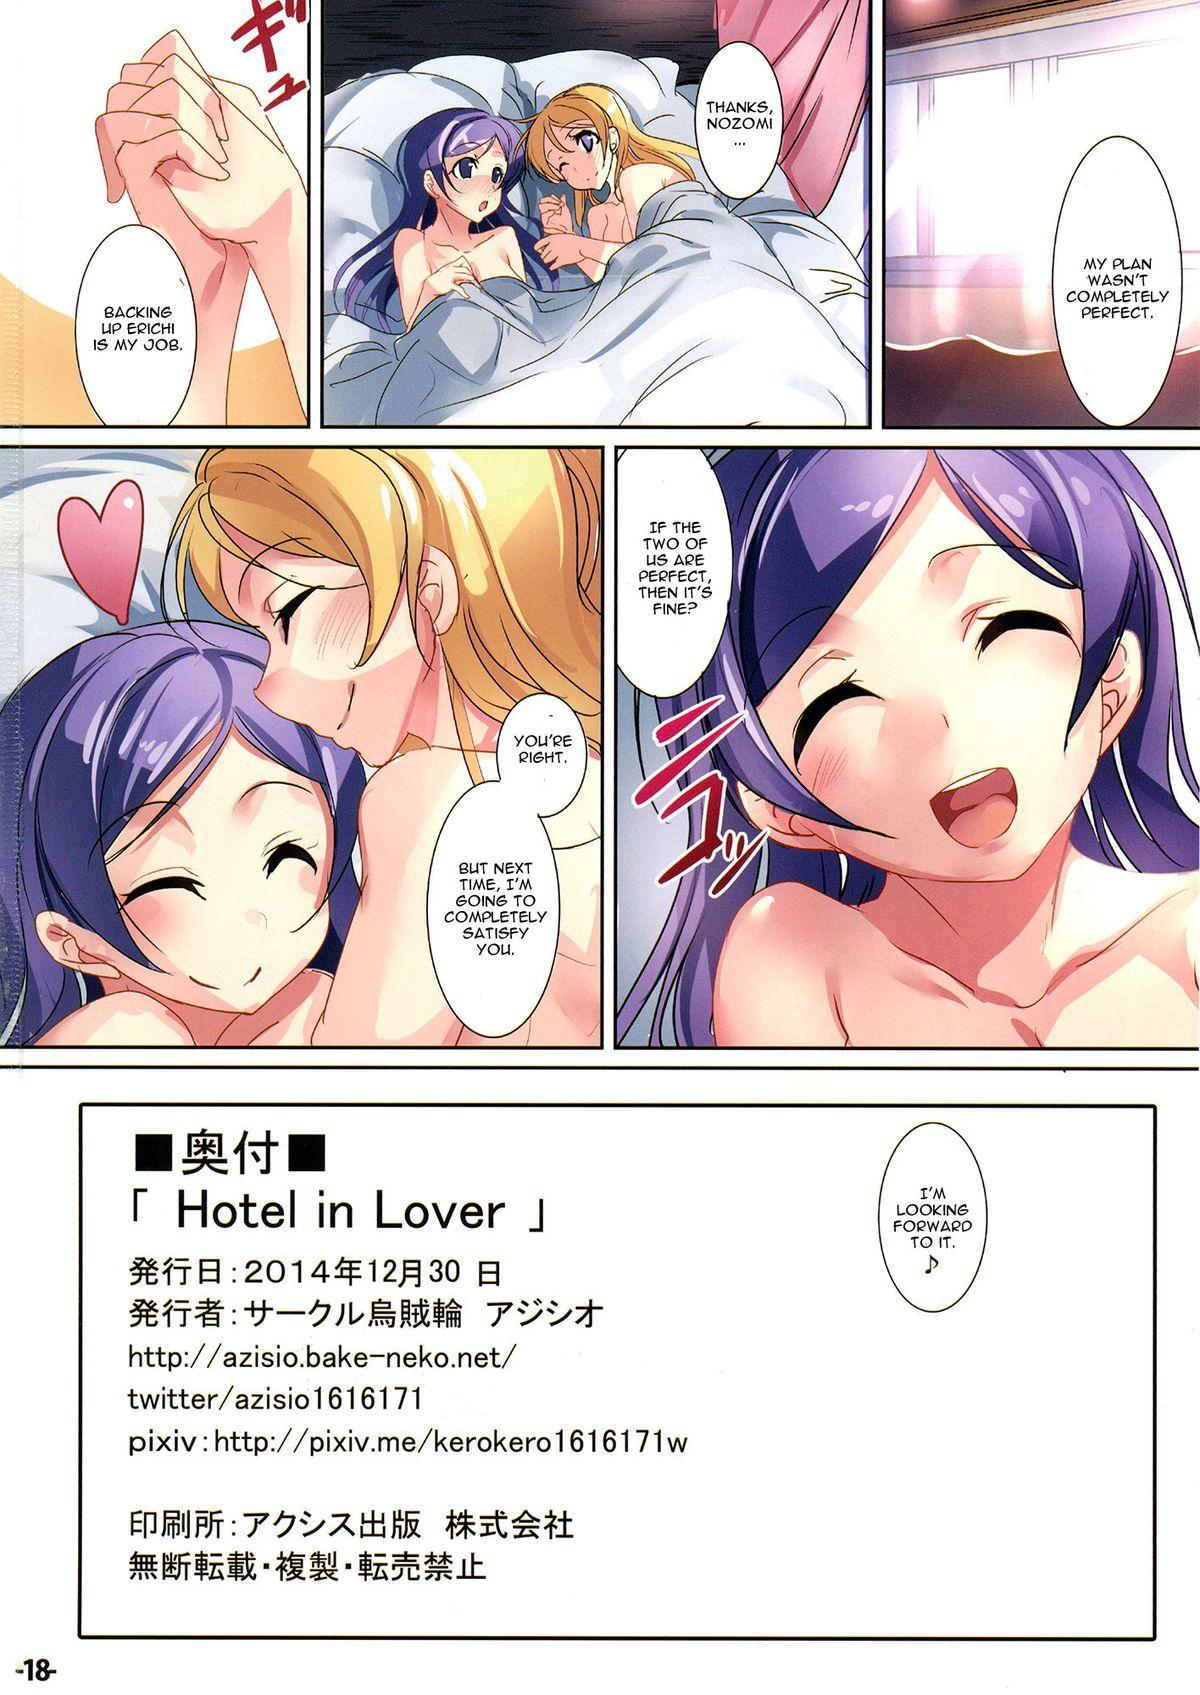 Edging Hotel in Lover - Love live Free Amature Porn - Page 17